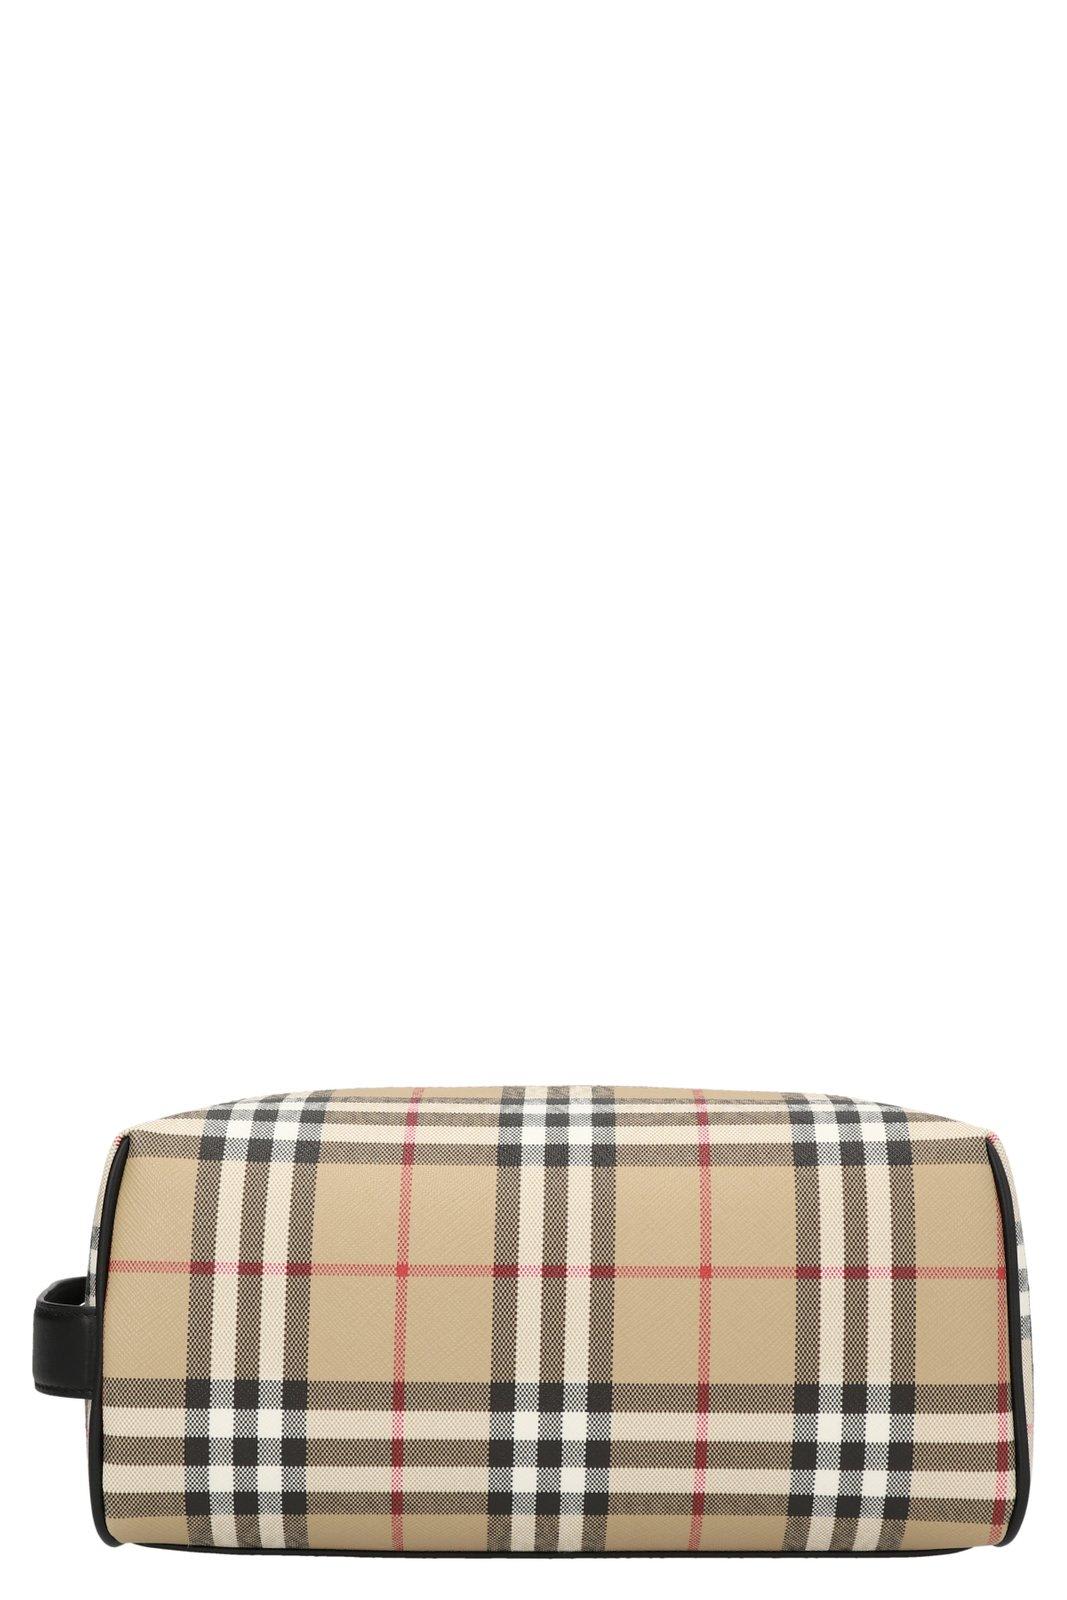 Burberry Vintage Checkered Toiletry Bag